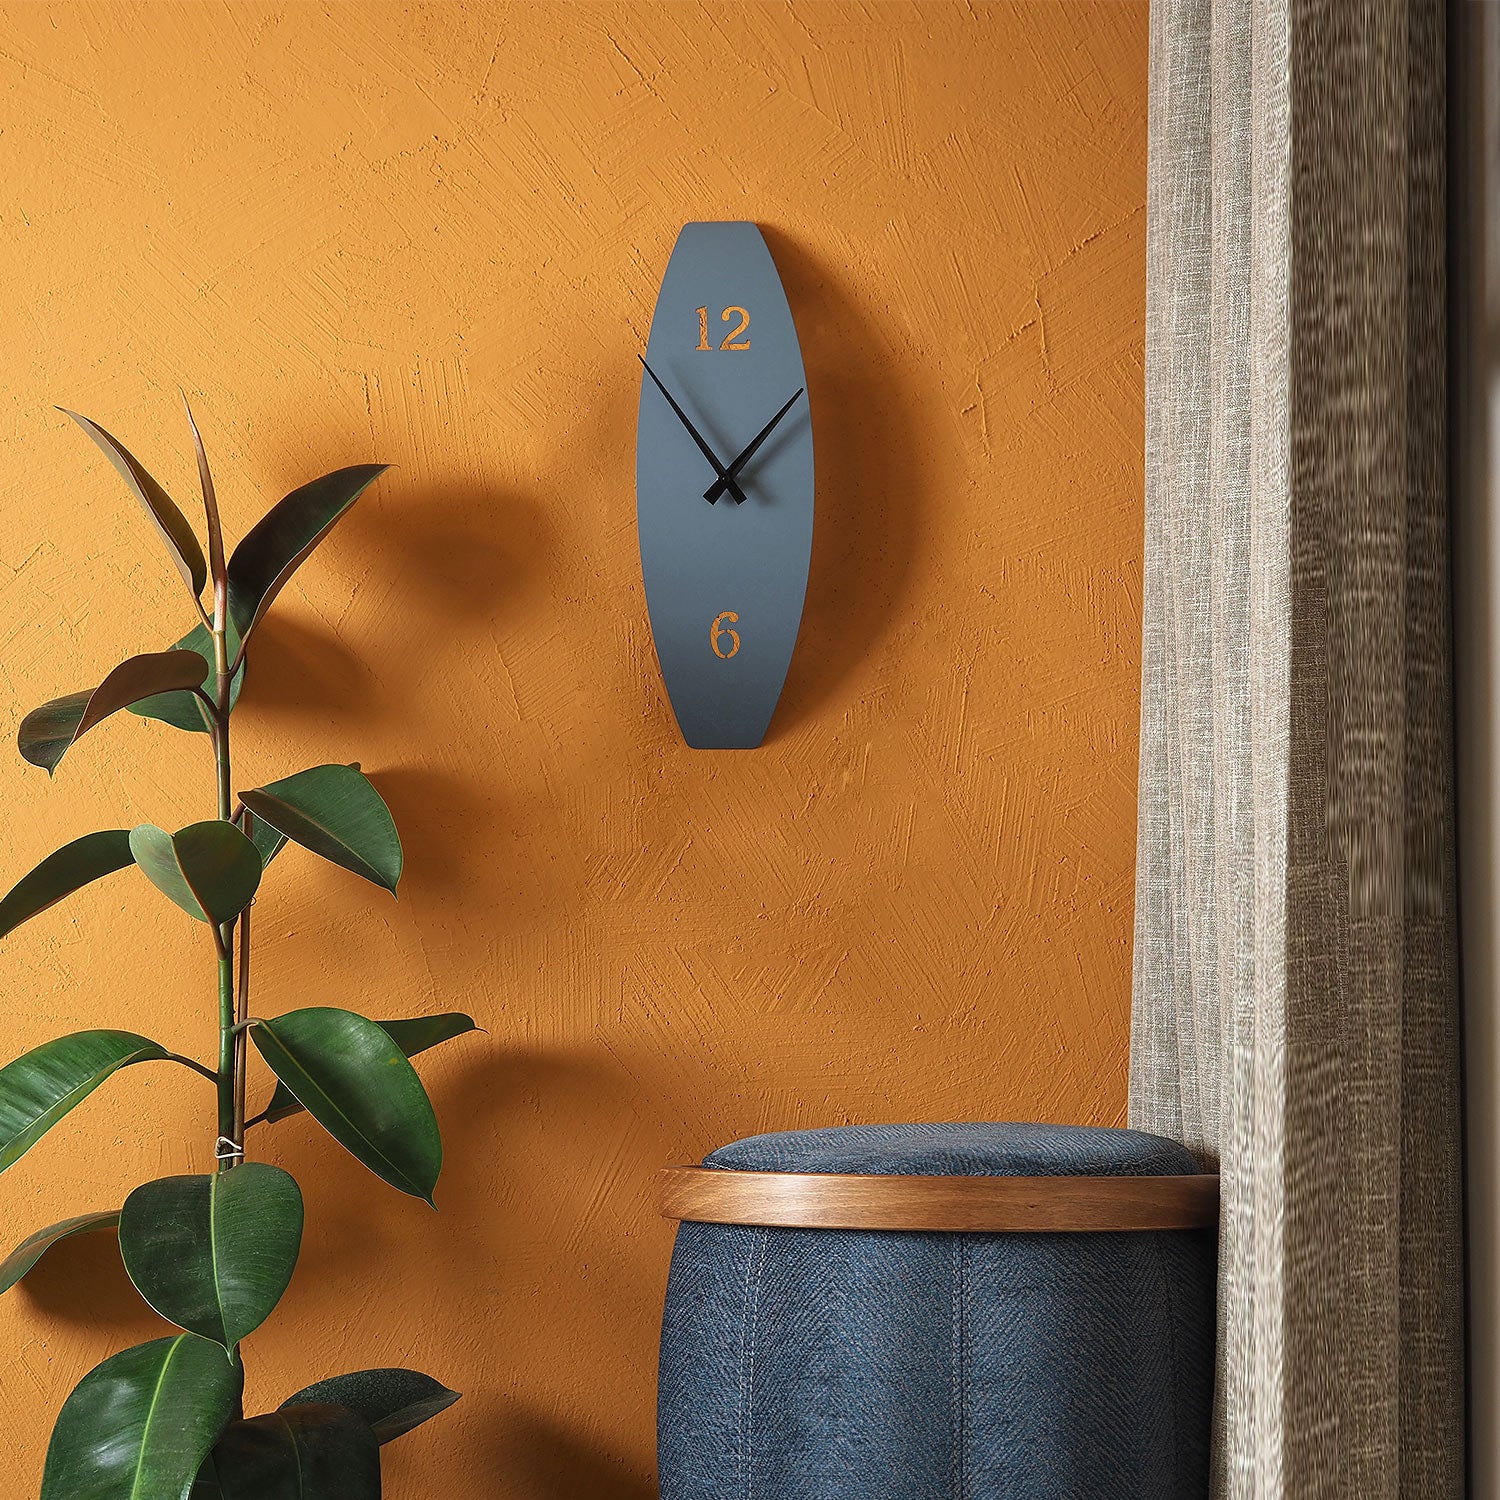 Curved Modern Wall Clock with Pendulum